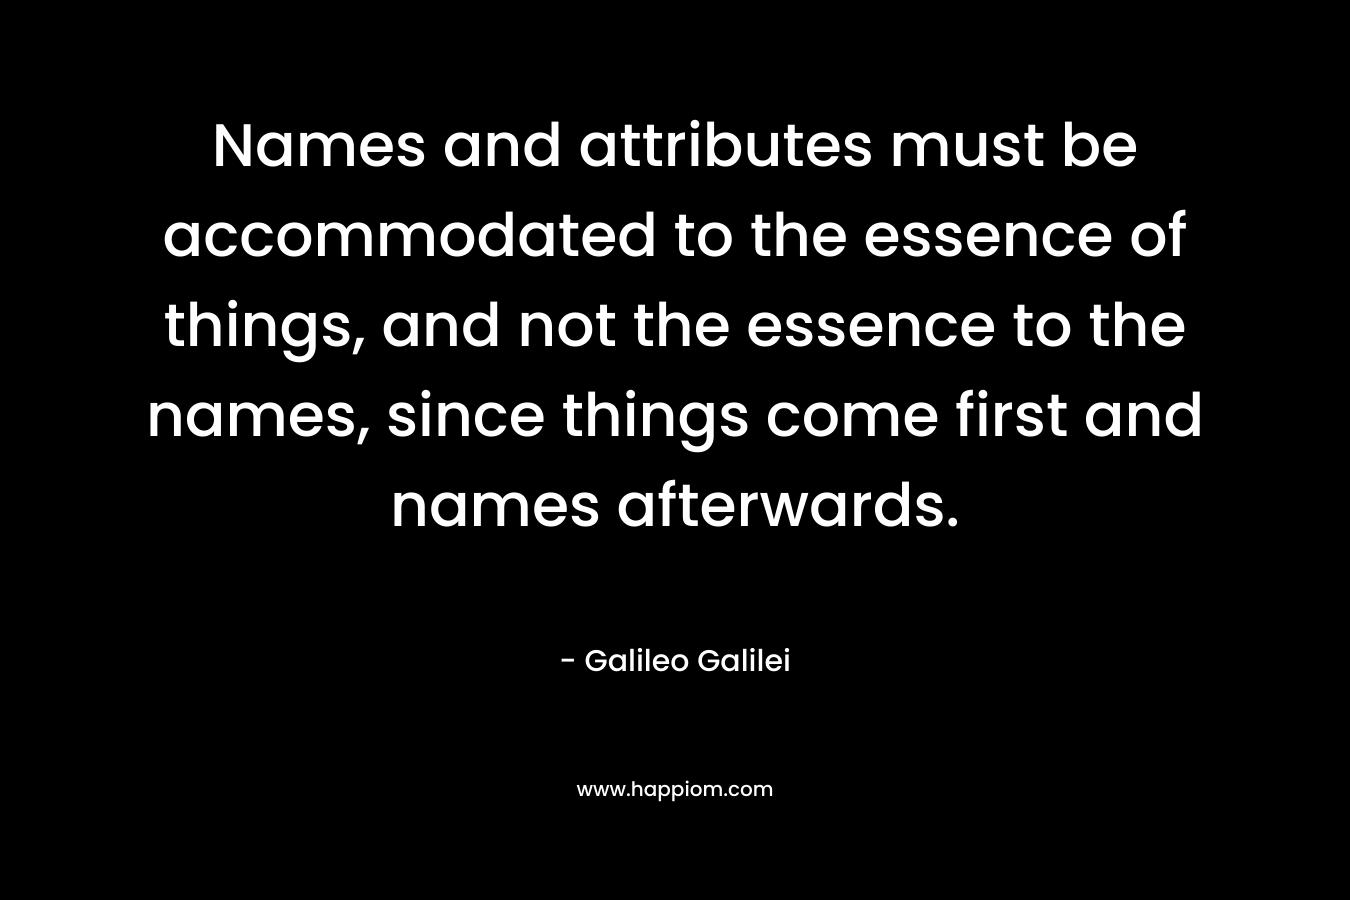 Names and attributes must be accommodated to the essence of things, and not the essence to the names, since things come first and names afterwards. – Galileo Galilei